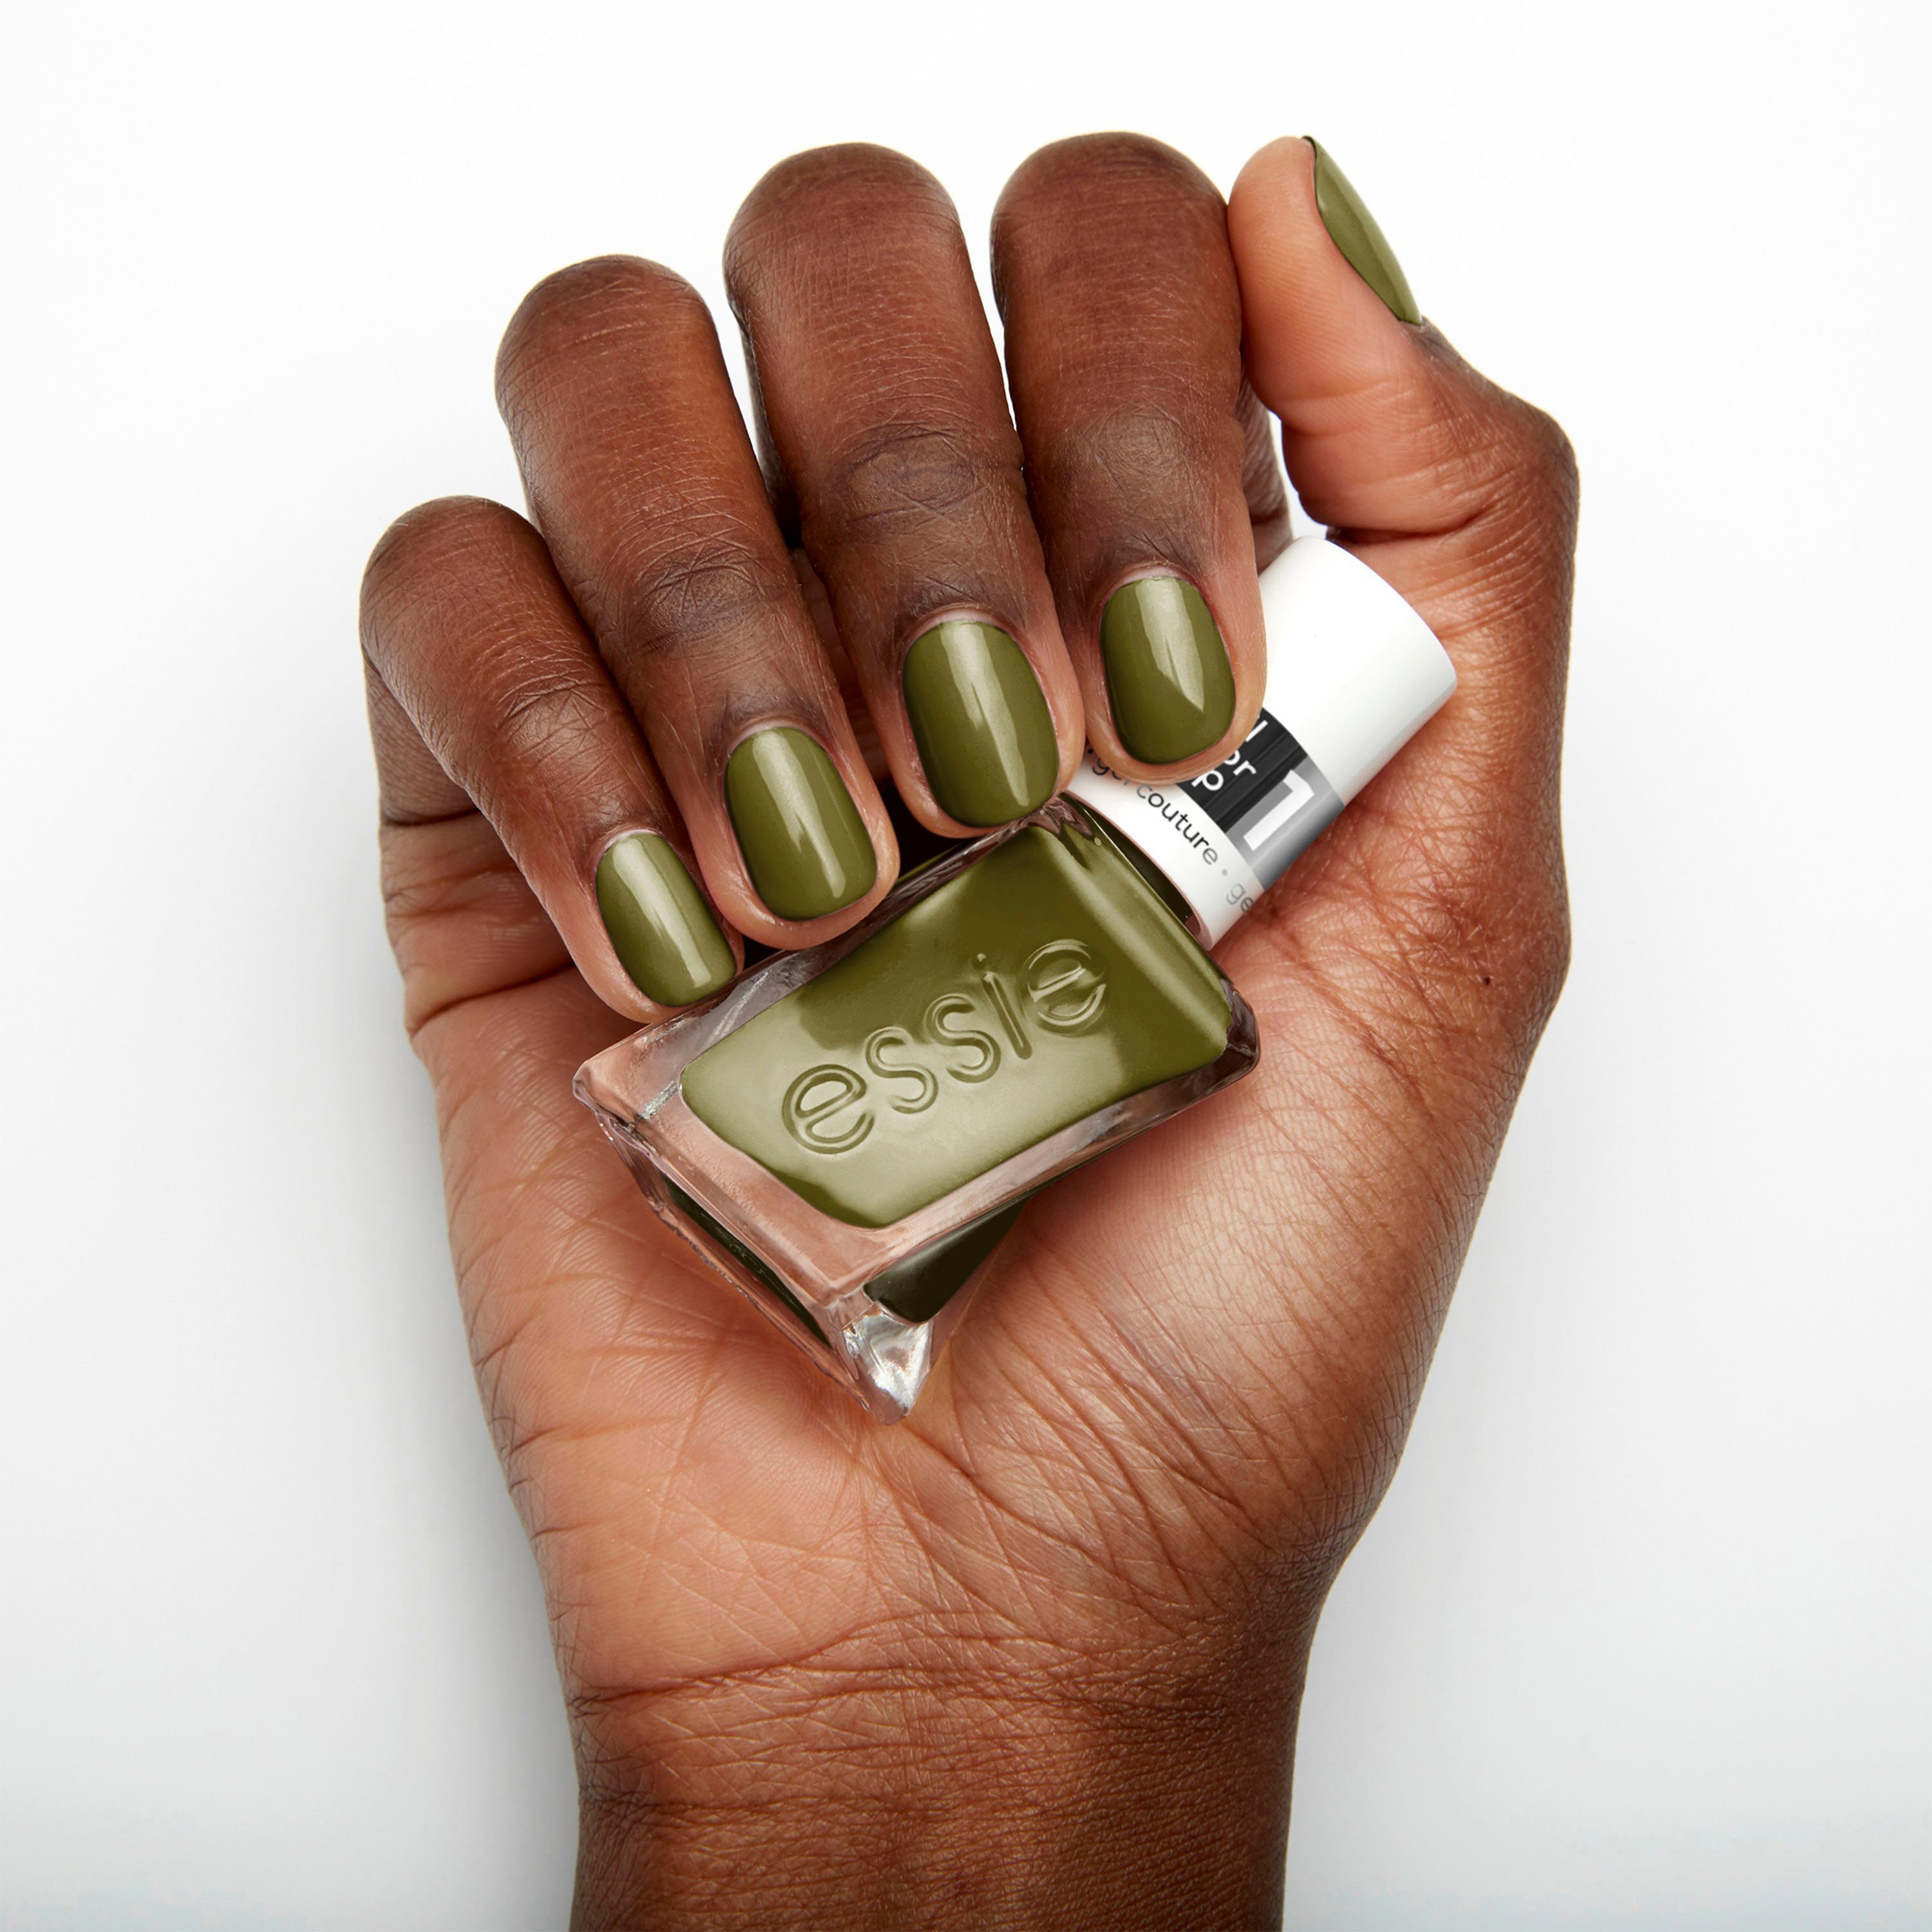 540 Nagellack, plaid, gel totally couture couture essie - gel